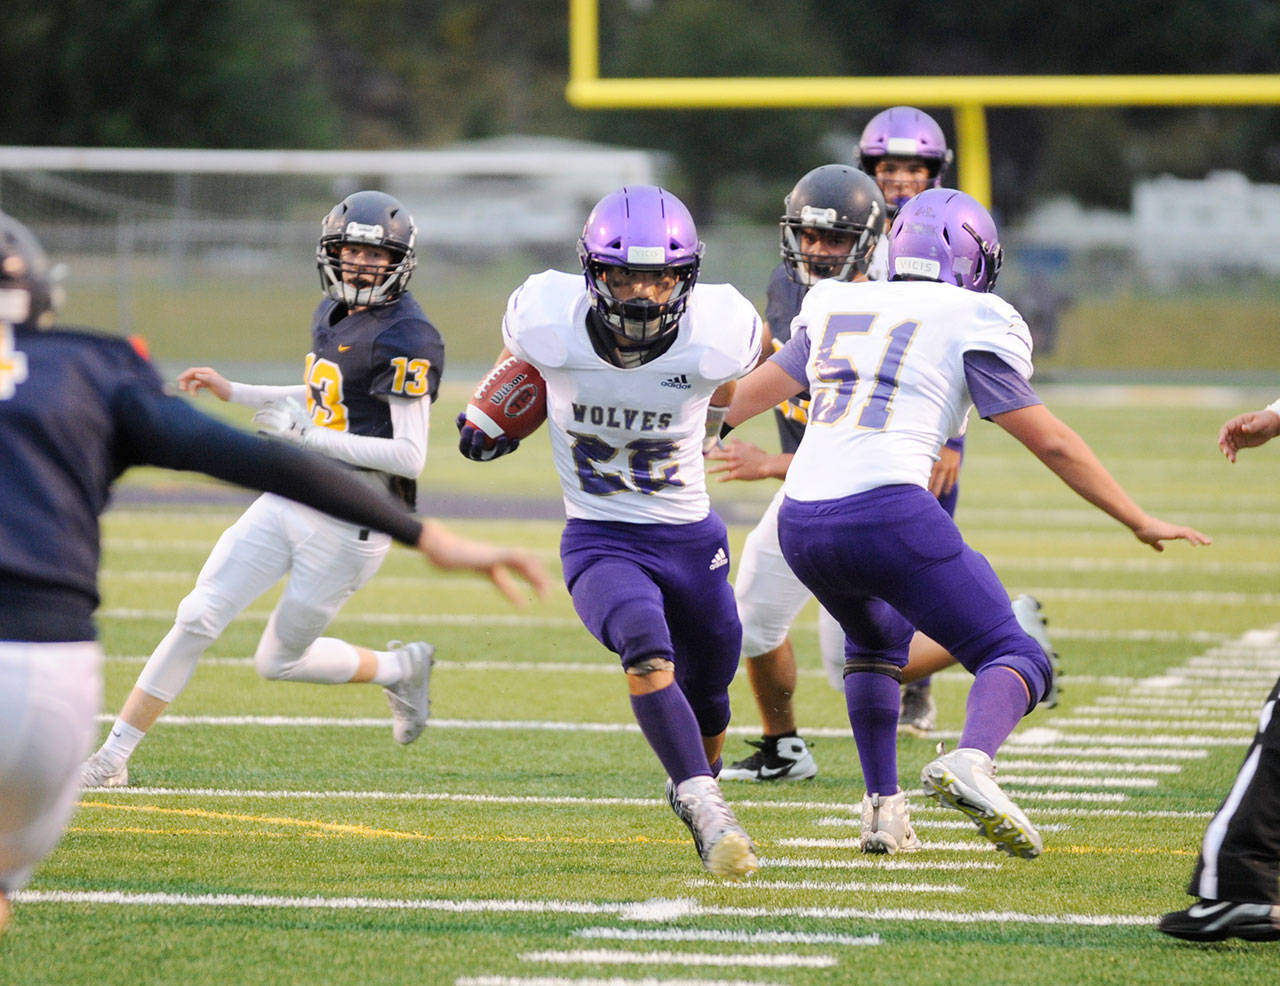 Sequim running back Walker Ward finds a gaping hole and bursts through for a big gain in the Wolves’ 27-13 win at Forks on Sept. 13. Ward finished with 160 yards on 31 carries. Sequim Gazette photo by Michael Dashiell